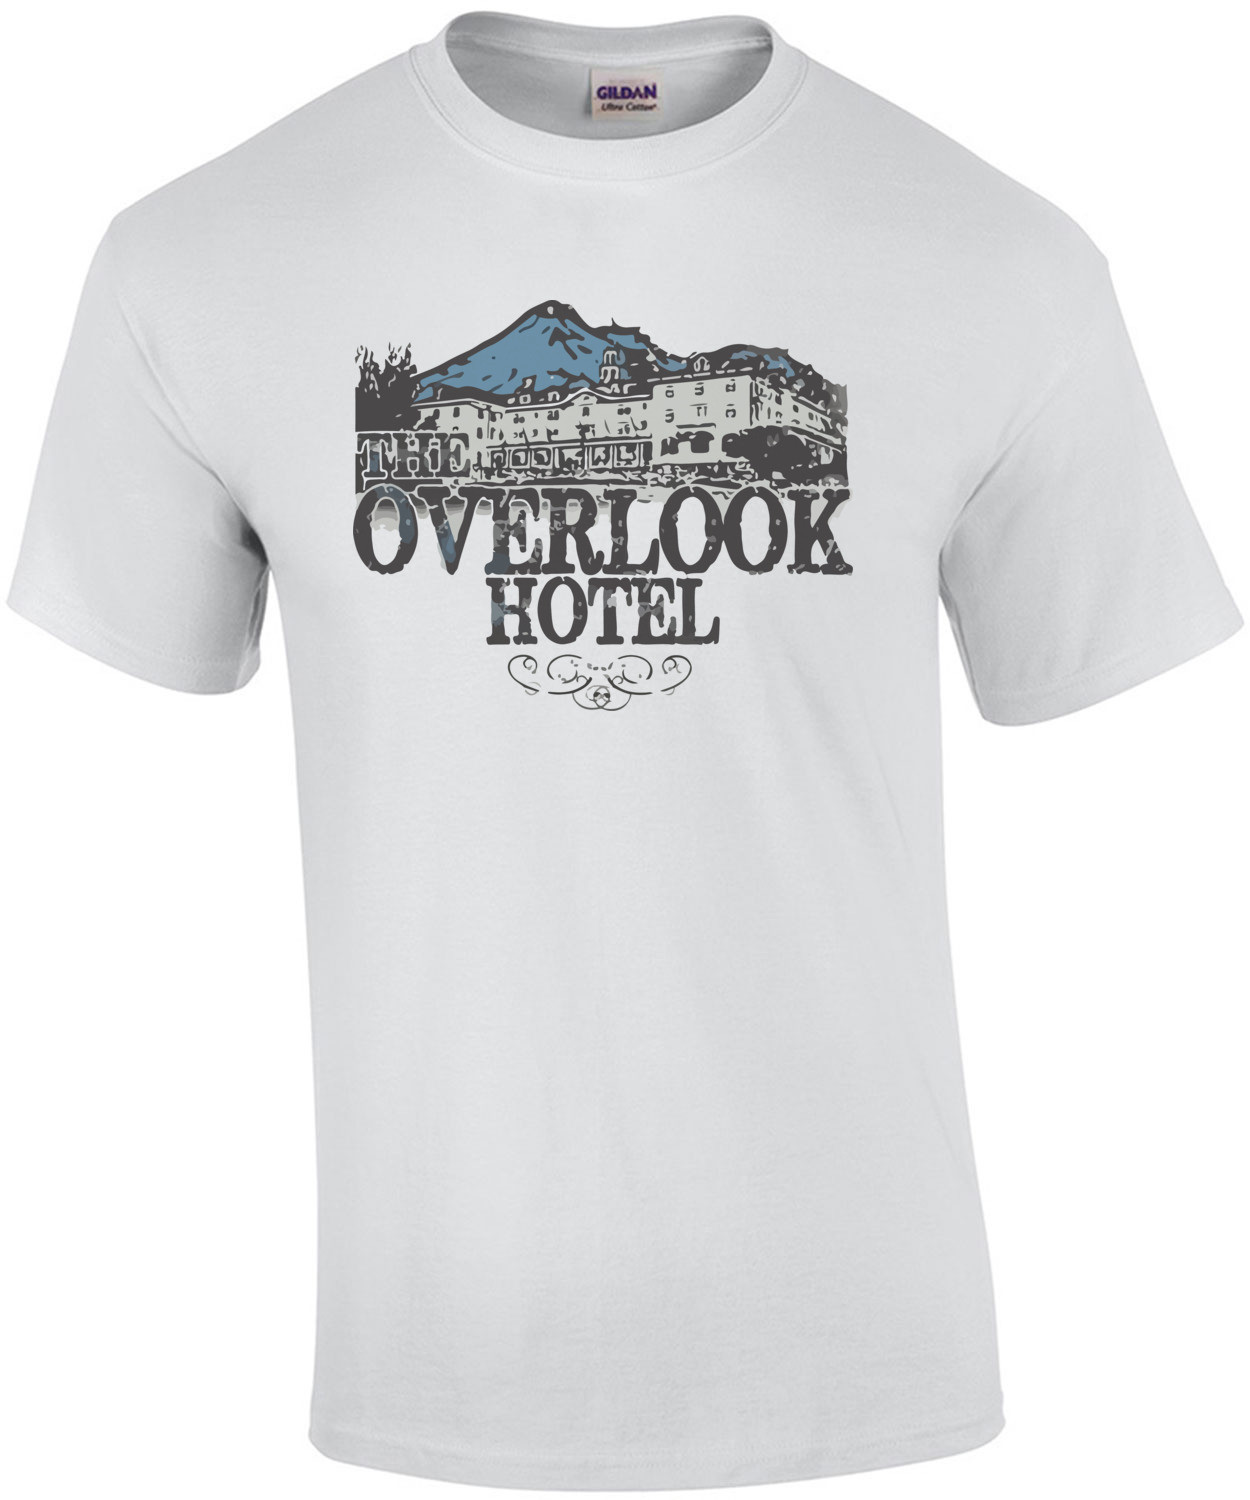 The Overlook Hotel - The Shining T-Shirt